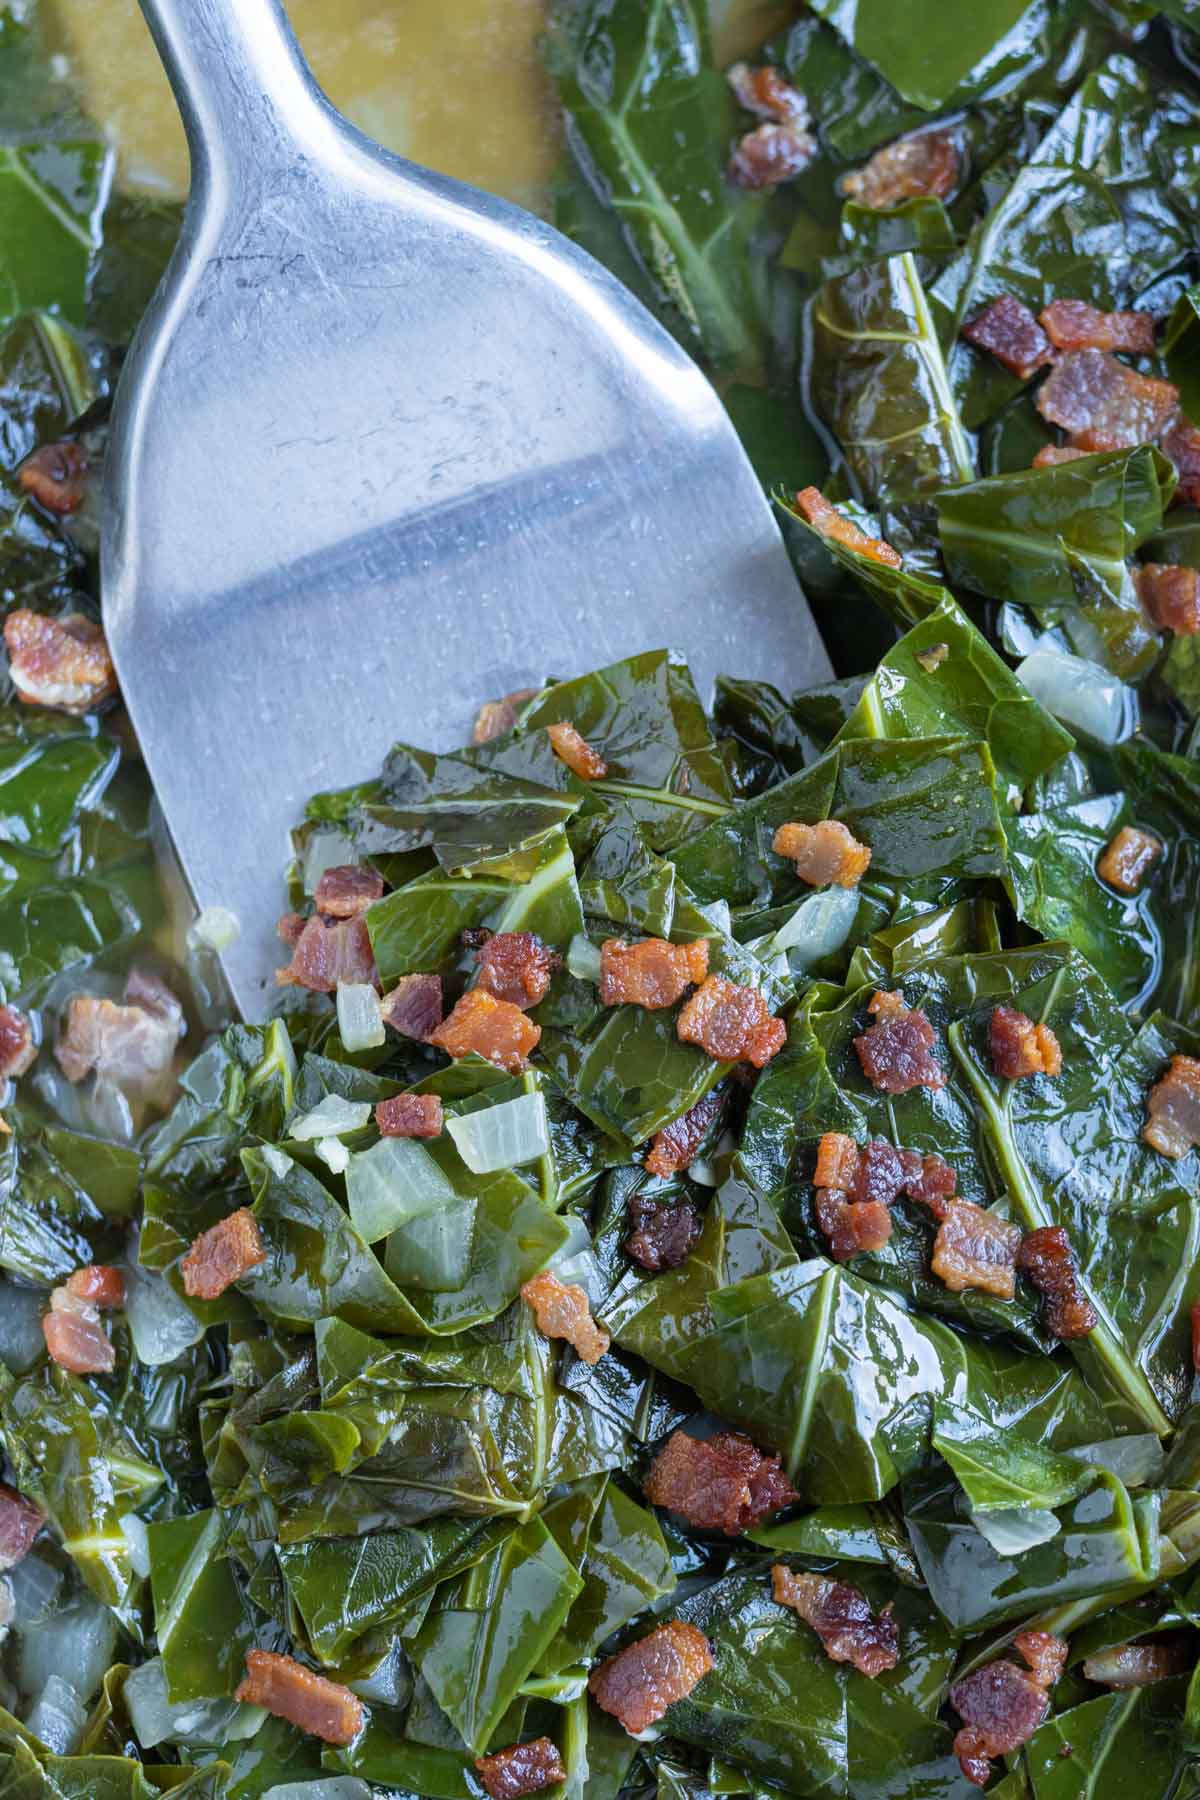 A spatula is shown dishing the collard greens from a pan.